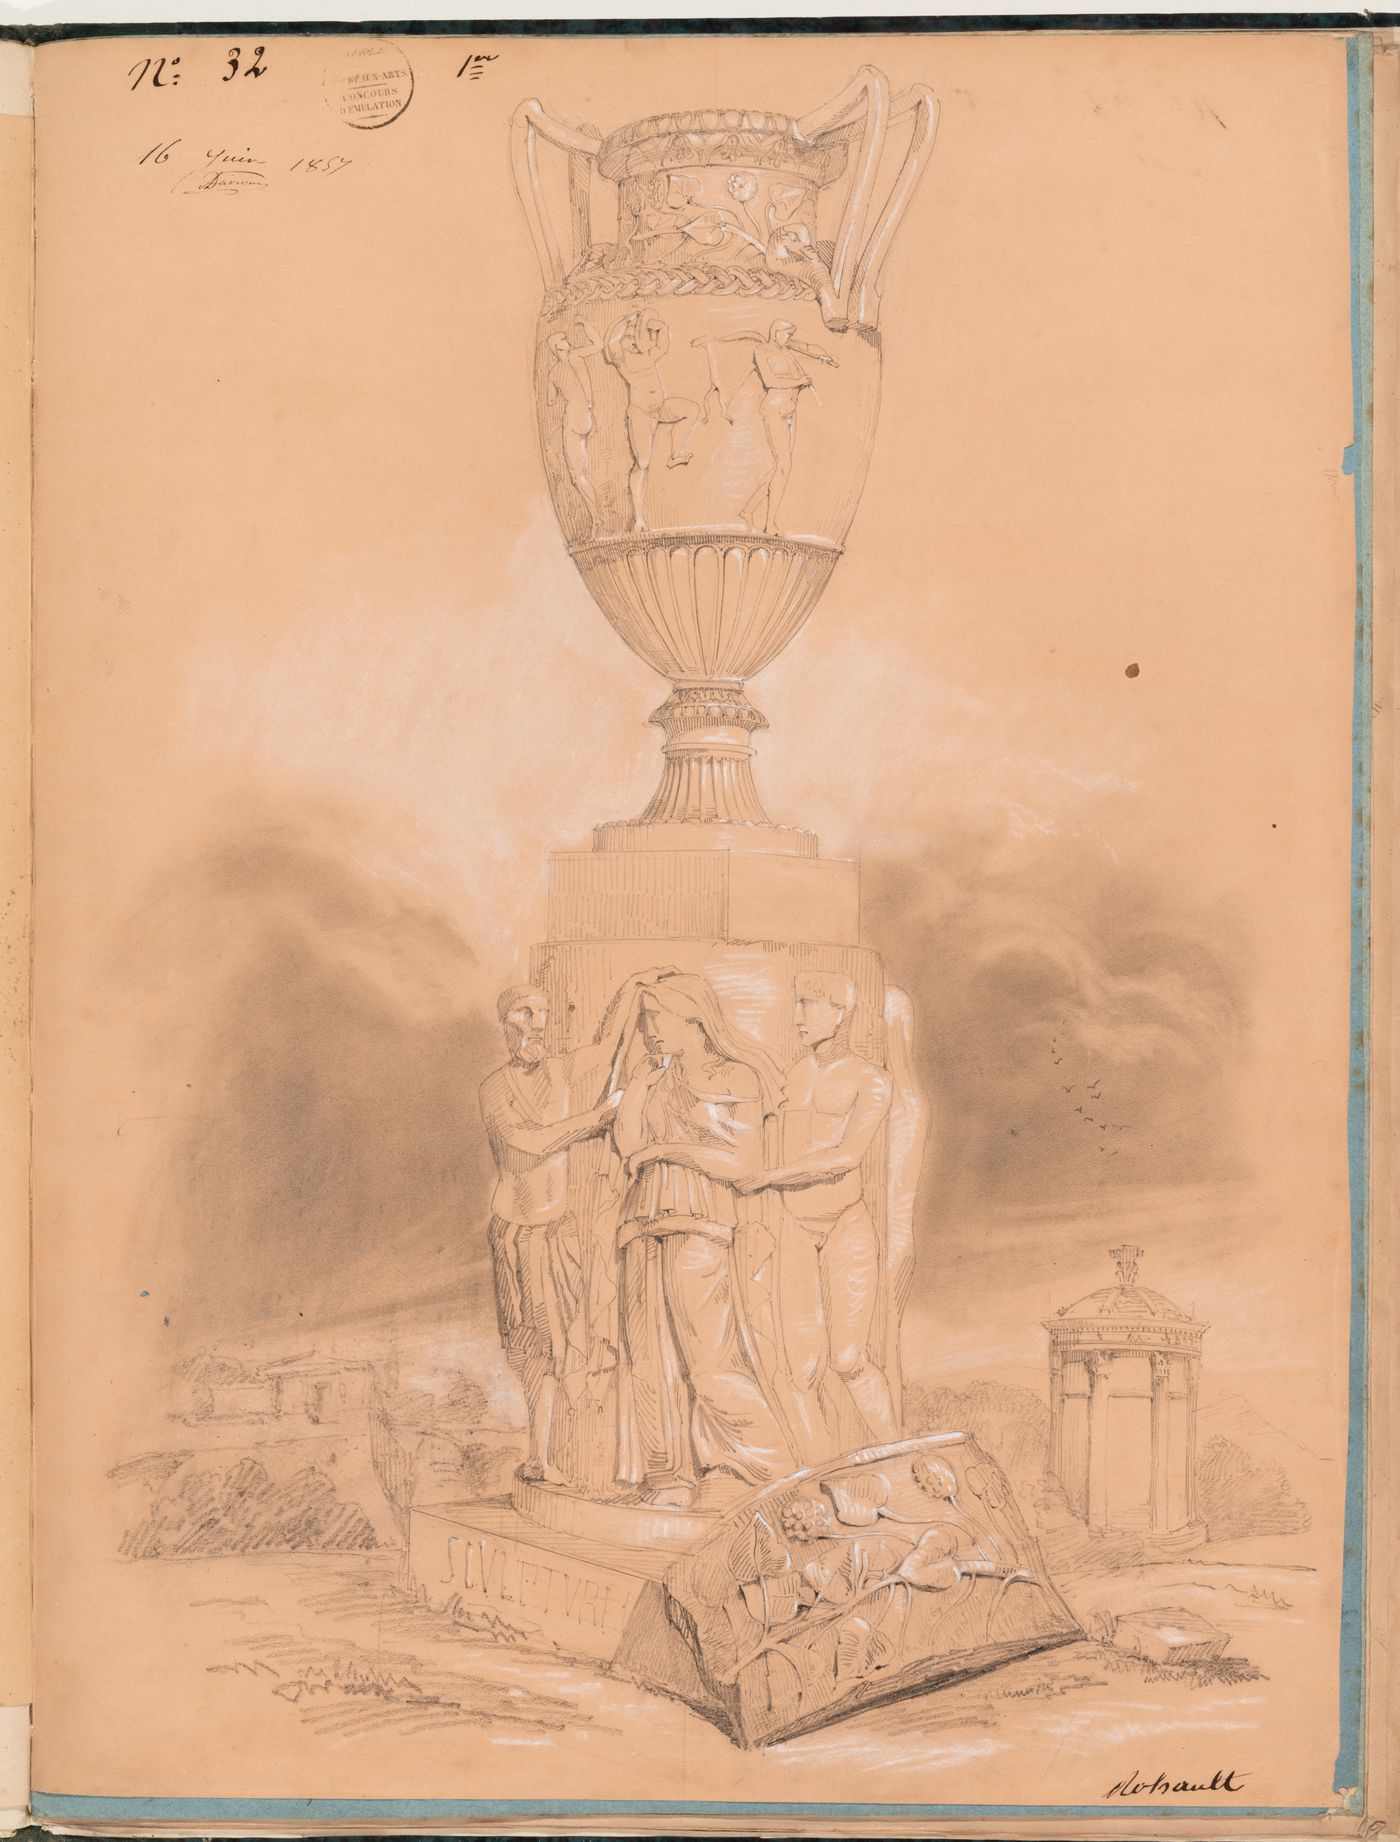 Concours d'émulation entry, 16 June 1857: Study of a funerary urn with other funerary structures